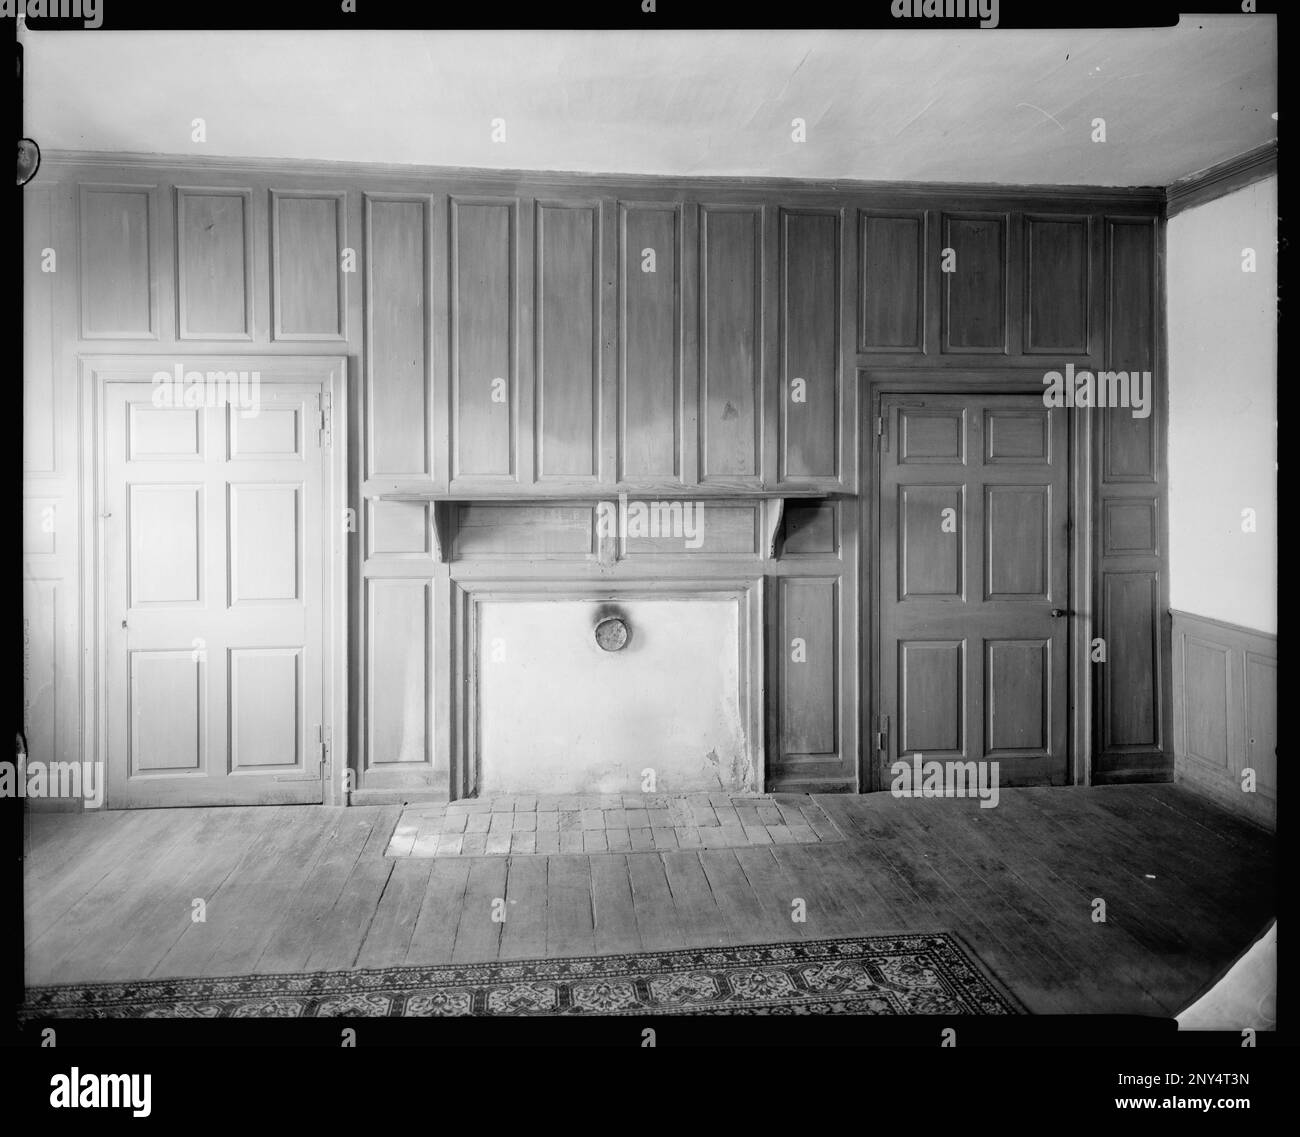 Salisbury Plains, Princess Anne County, Virginia. Carnegie Survey of the Architecture of the South. United States  Virginia  Princess Anne County, Paneling, Interiors. Stock Photo